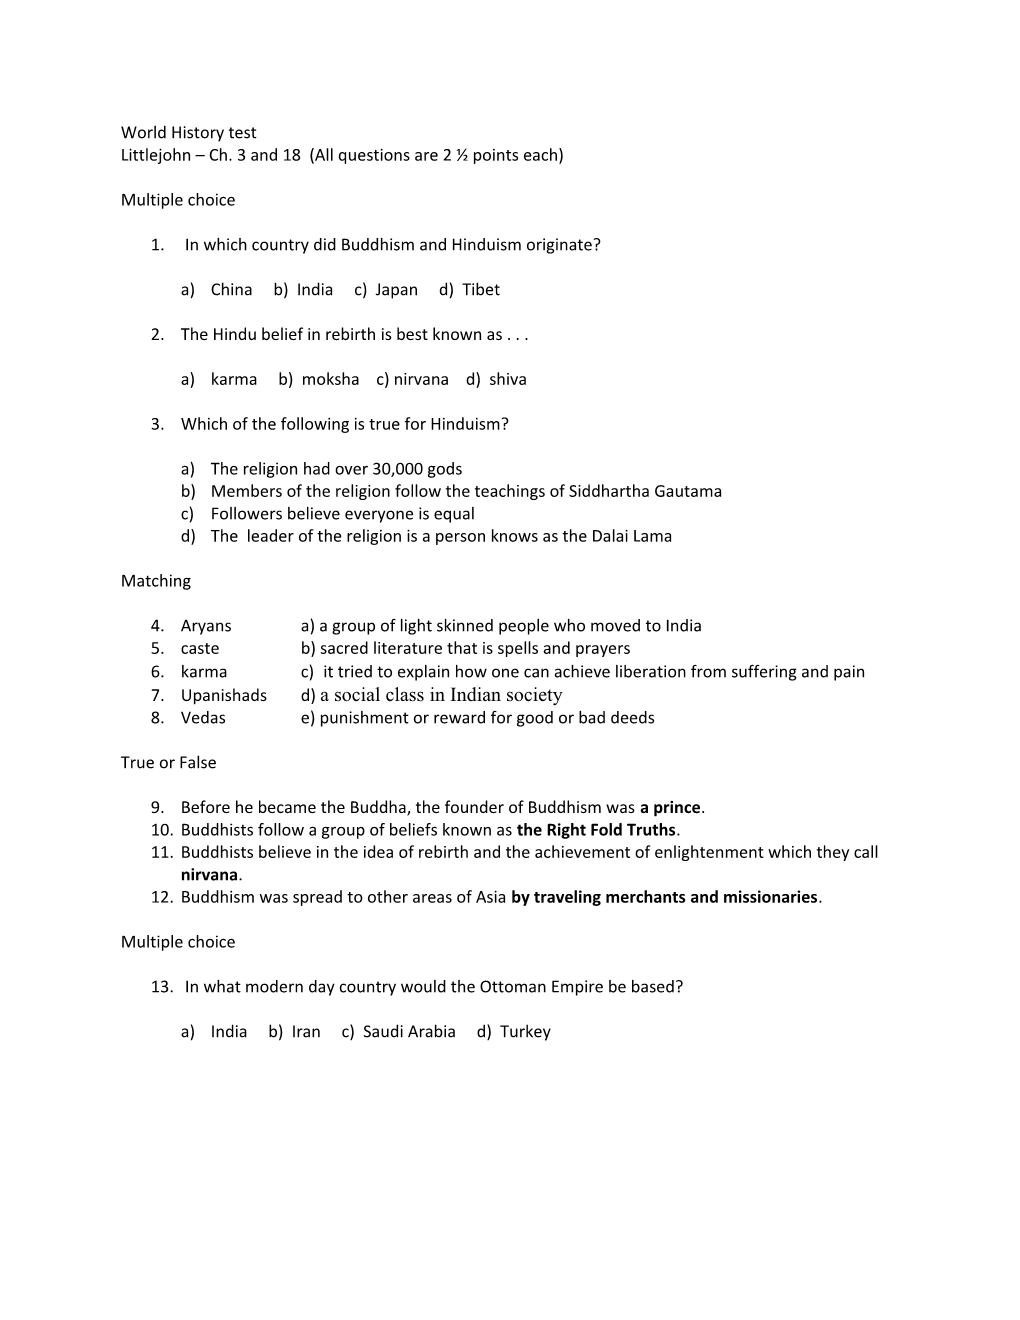 Littlejohn Ch. 3 and 18 (All Questions Are 2 Points Each)